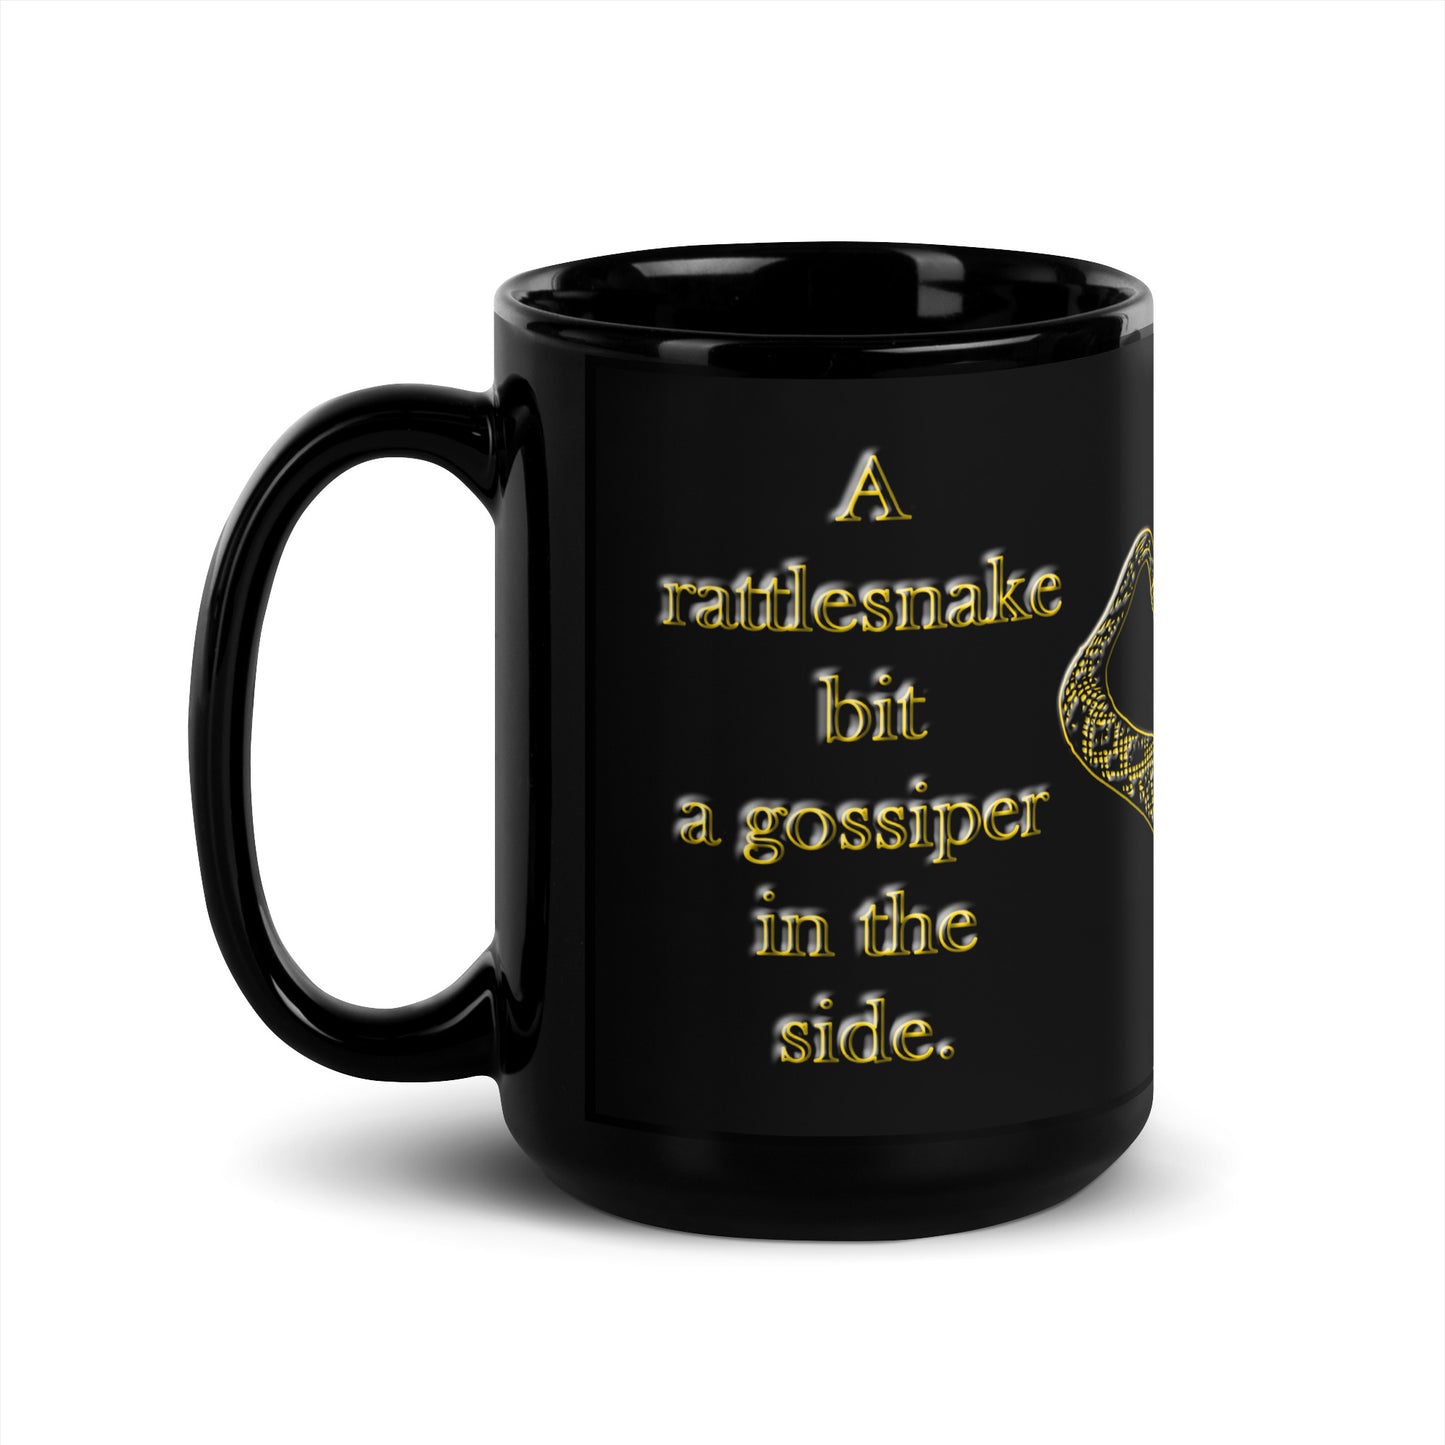 A010 Mug - Black Glossy Ceramic Mug Featuring a Rattlesnake Graphic and the Text “A Rattlesnake Bit a Gossiper in the Side – The Gossiper Lived, The Rattlesnake Died.”